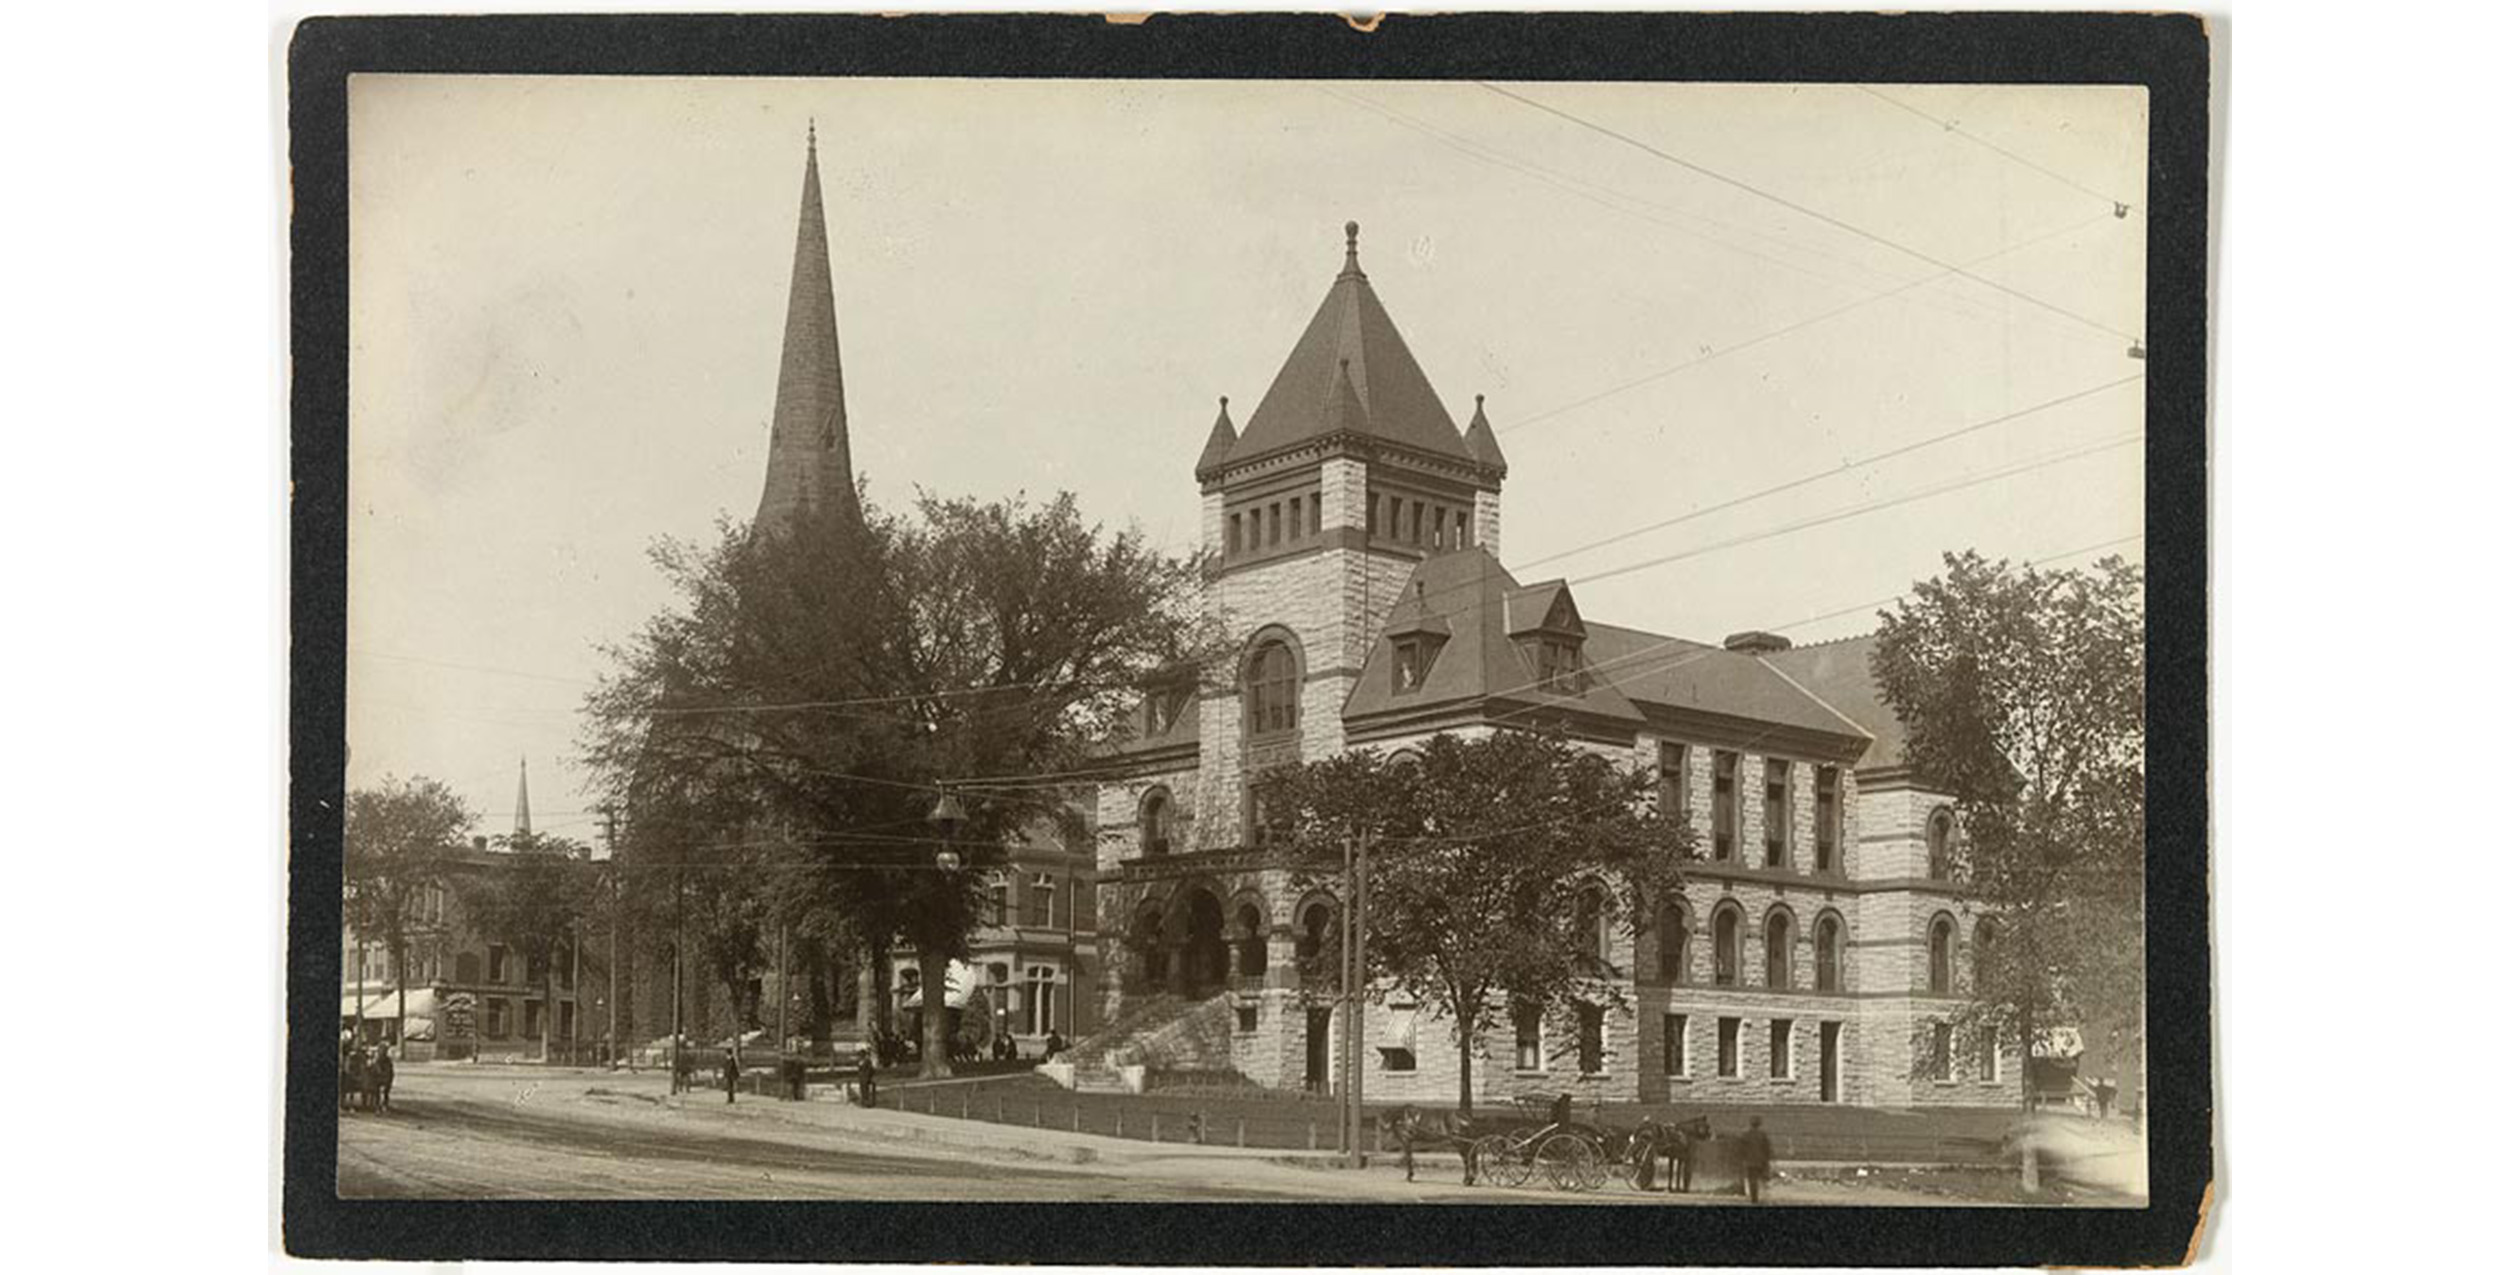 exterior, street curving around large stone building with lawn and trees, visible through trees is church spire, people and horse drawn carriages on street